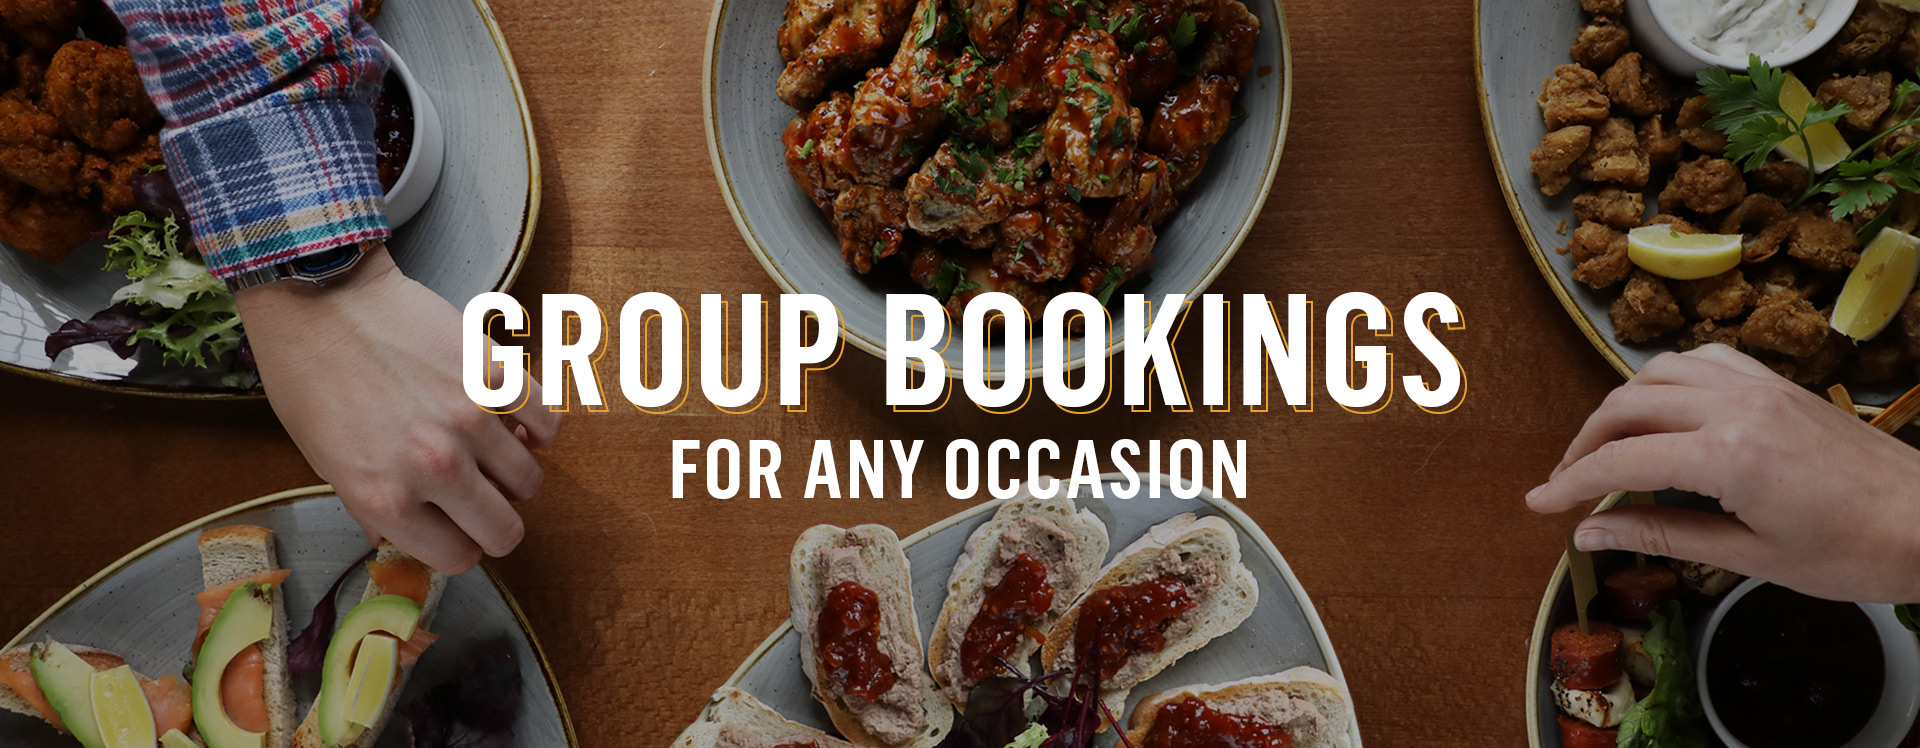 Group Bookings at The York